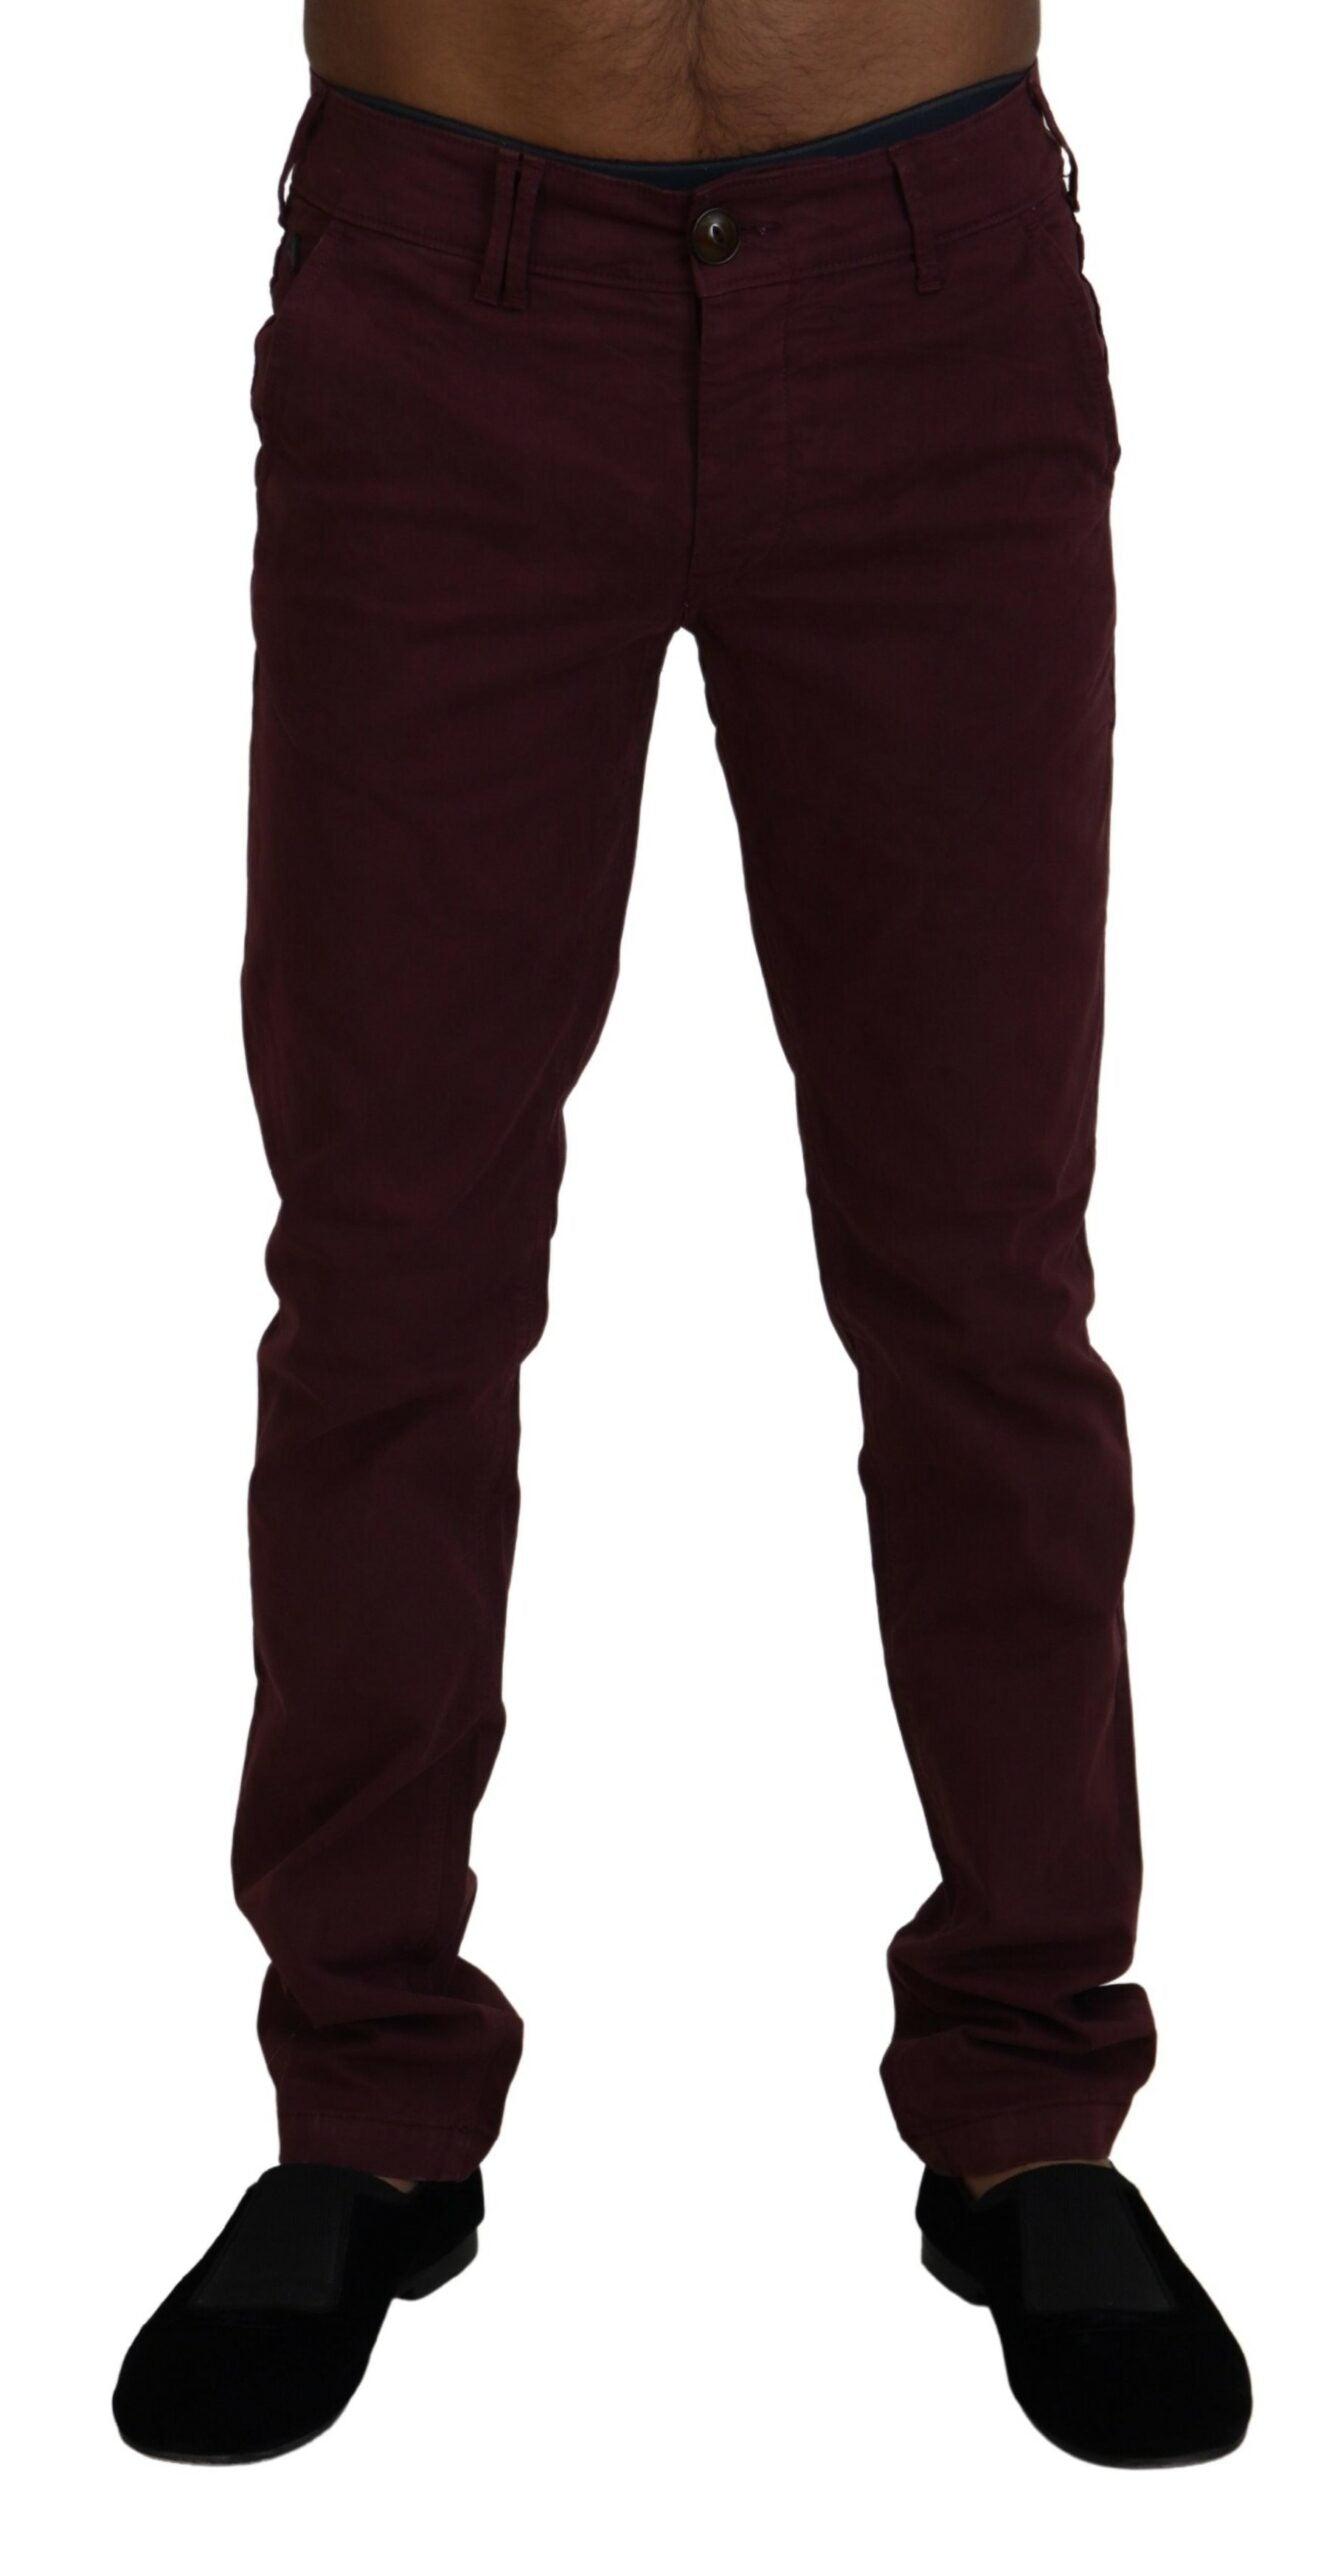 Cowtown Red Curb Cargo Pants (Maroon) $49.95